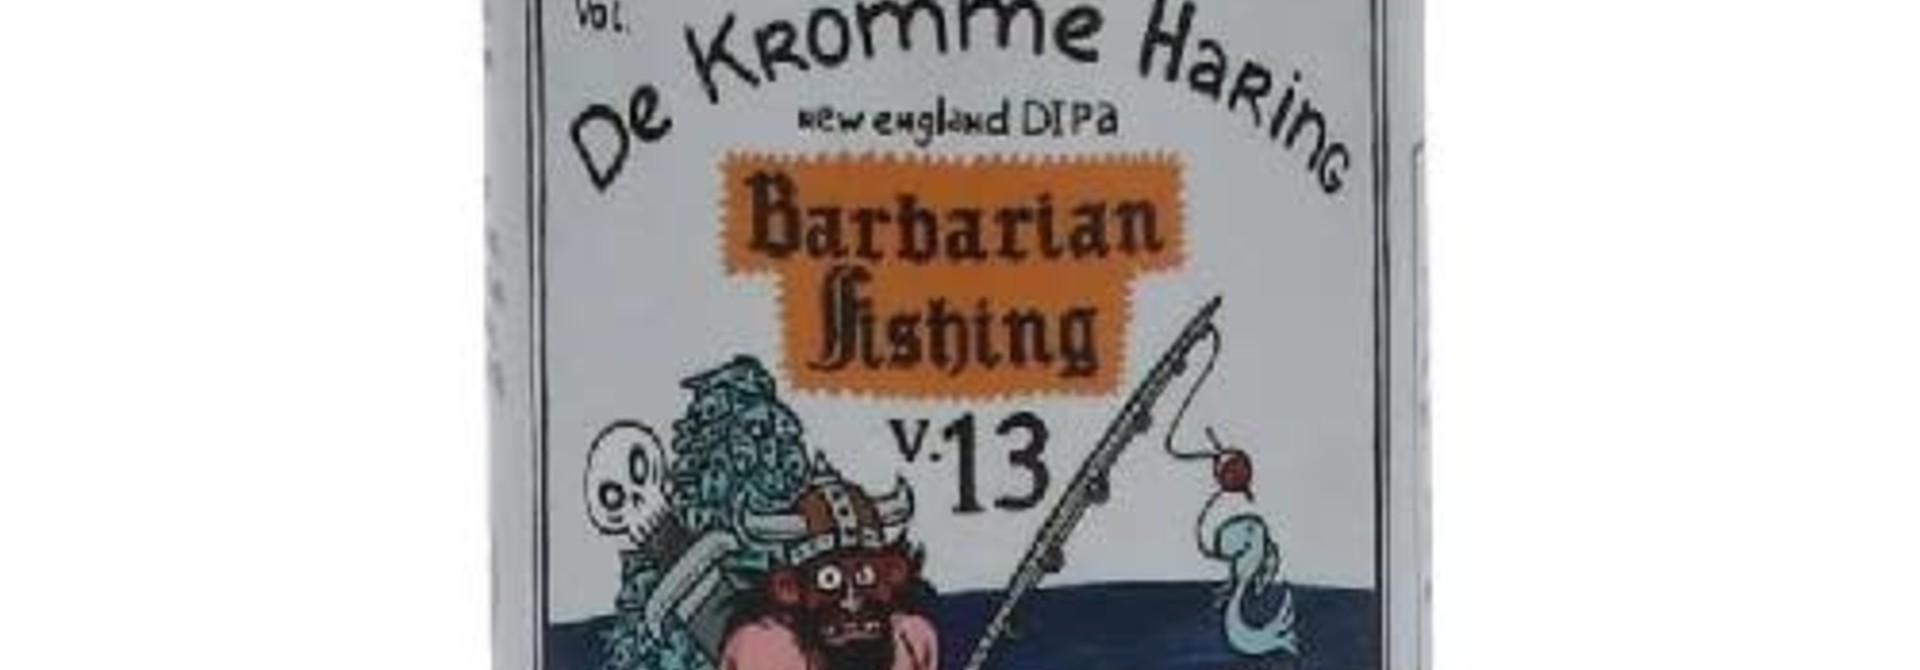 KROMME HARING BARBARIAN FISHING V13 33CL